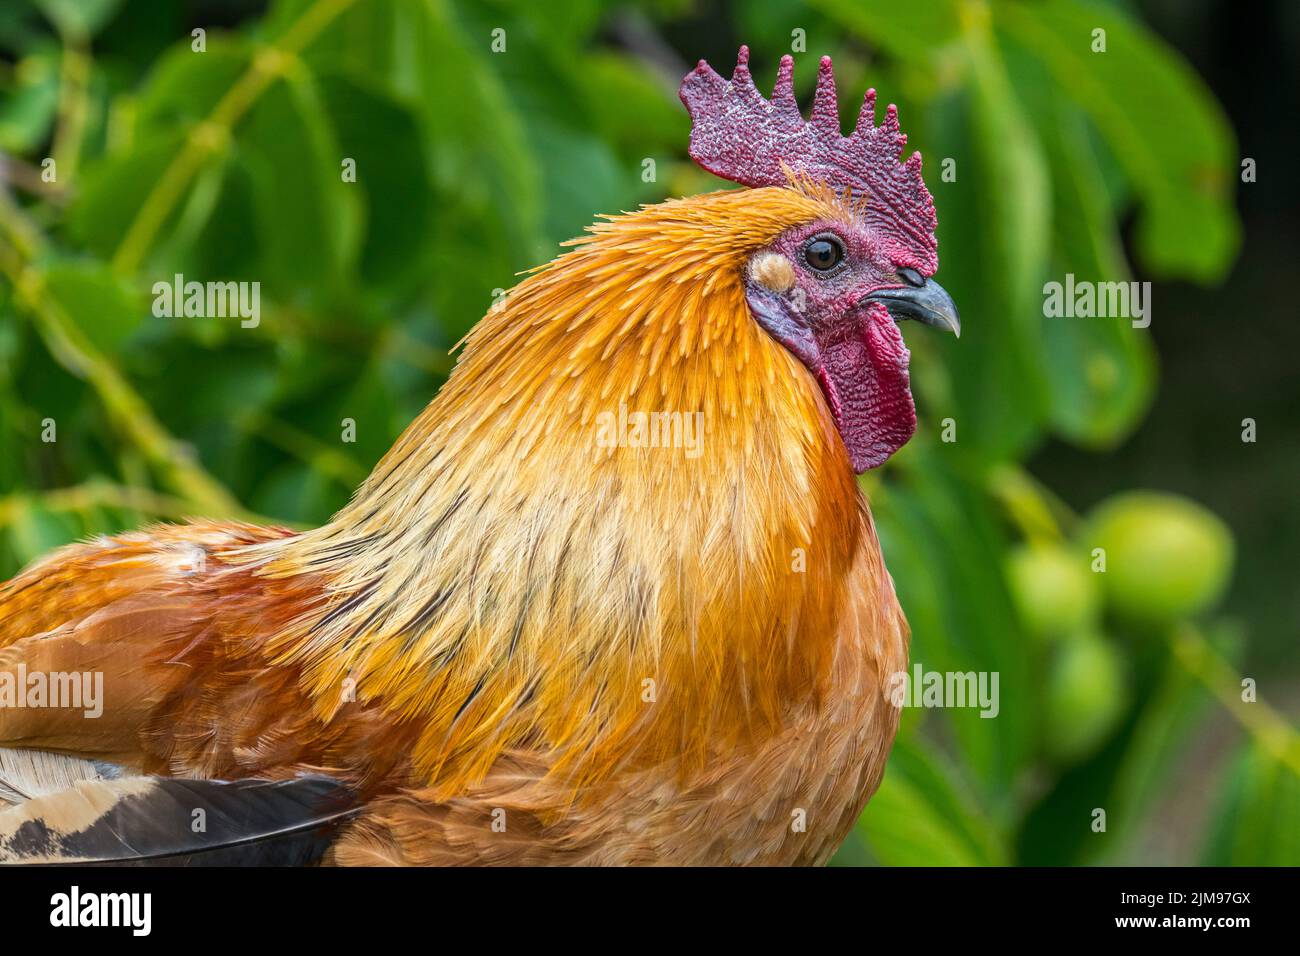 Close-up of cock / rooster, free range chicken at petting zoo / children's farm Stock Photo